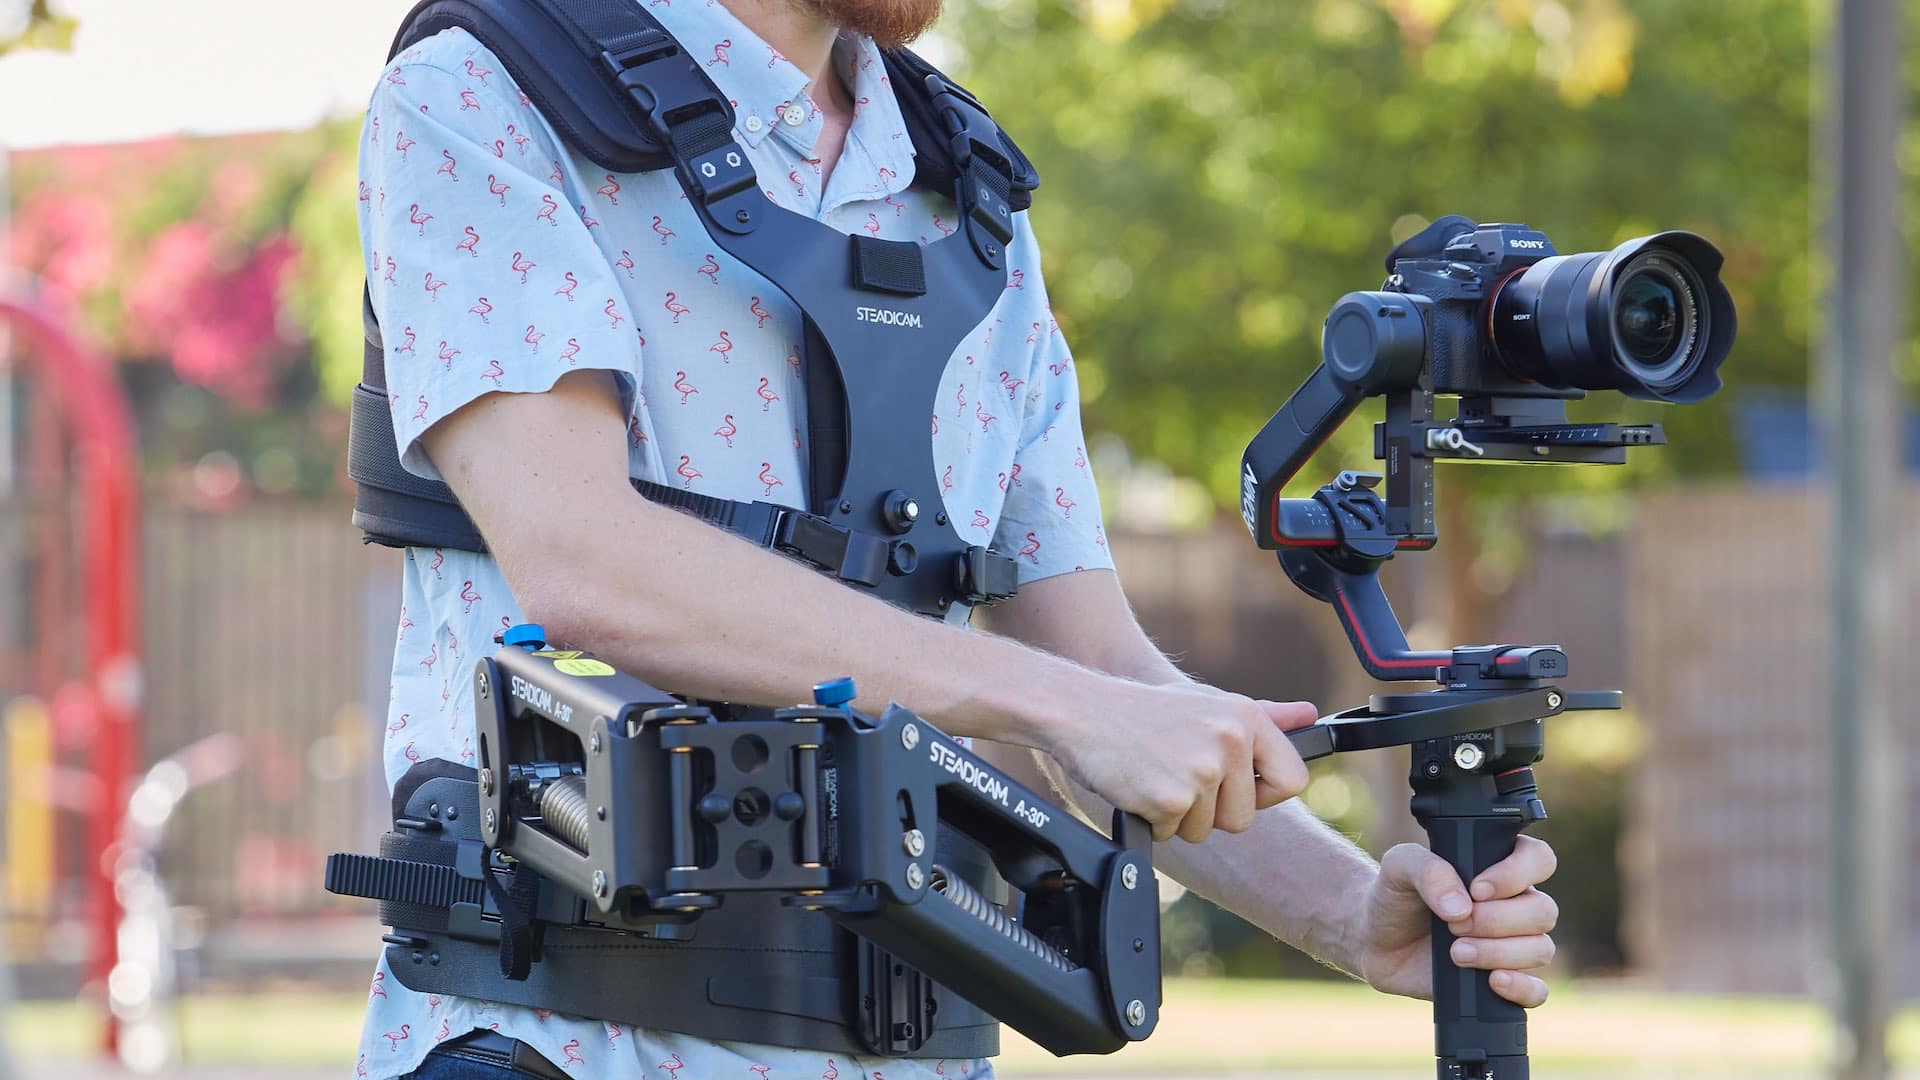 In combo with an arm and vest, the system can support up to 13.6kg (30lb)